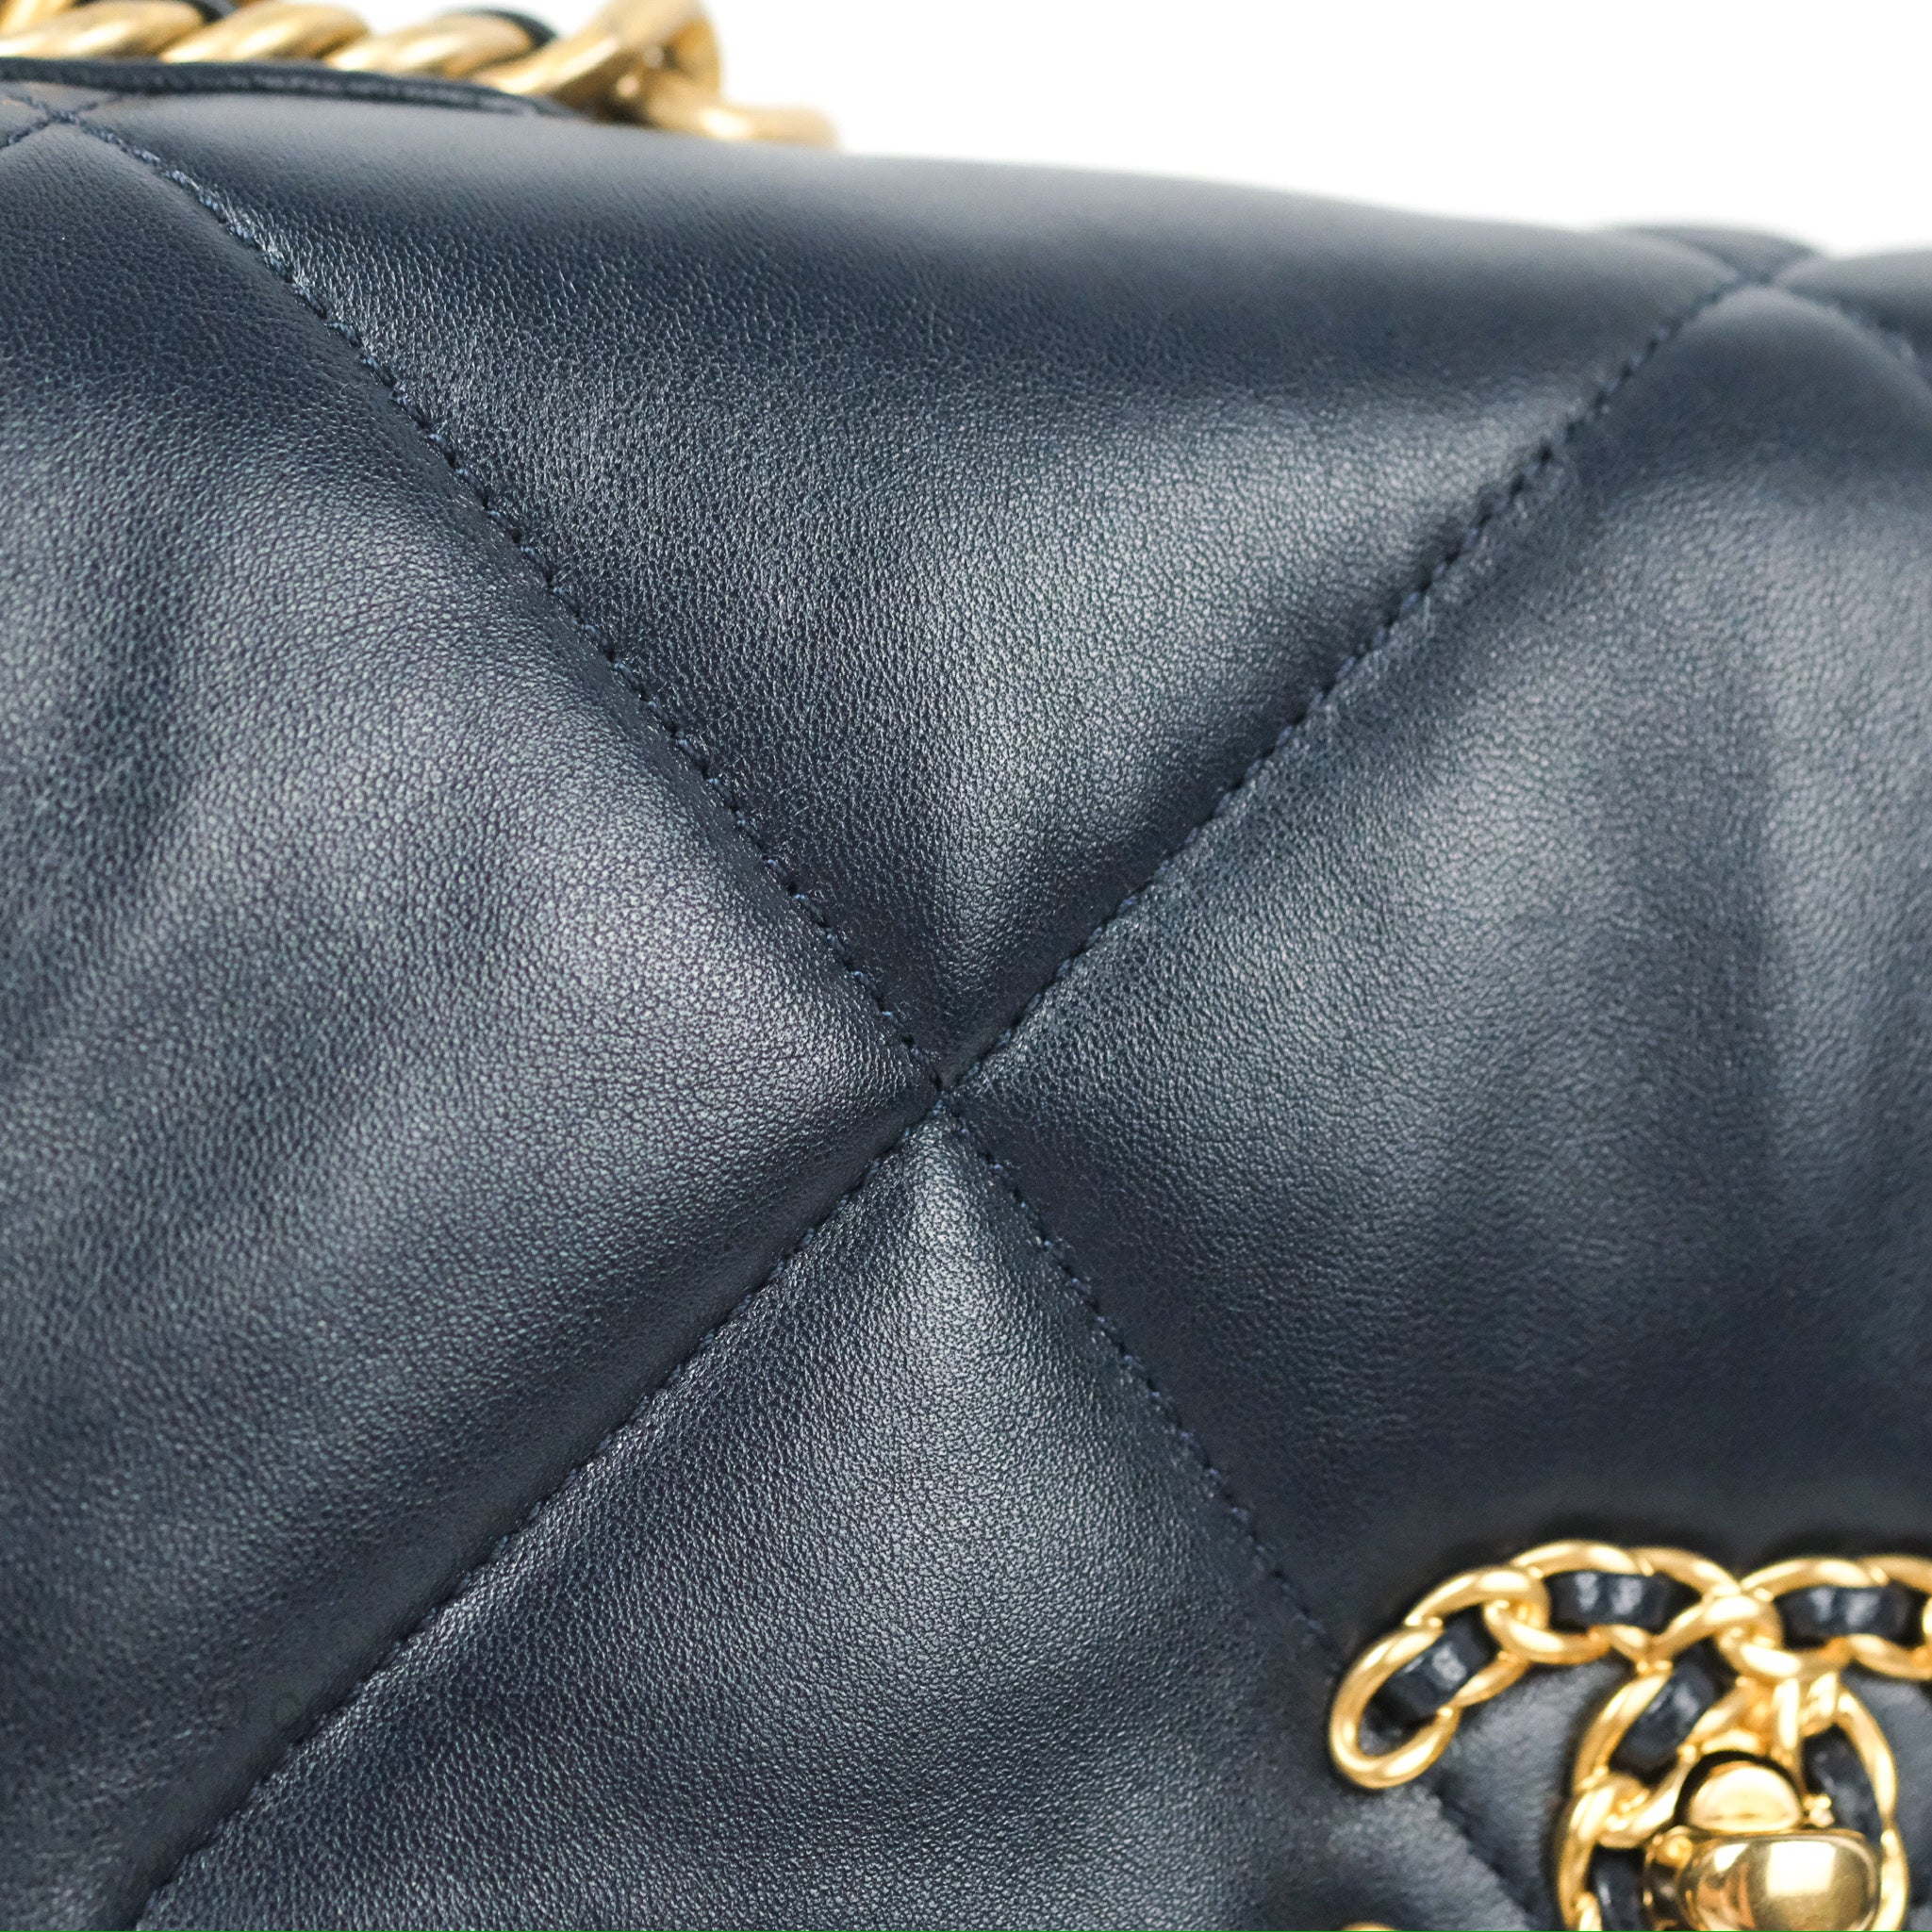 Chanel 19 Small Navy Mixed Hardware – Coco Approved Studio